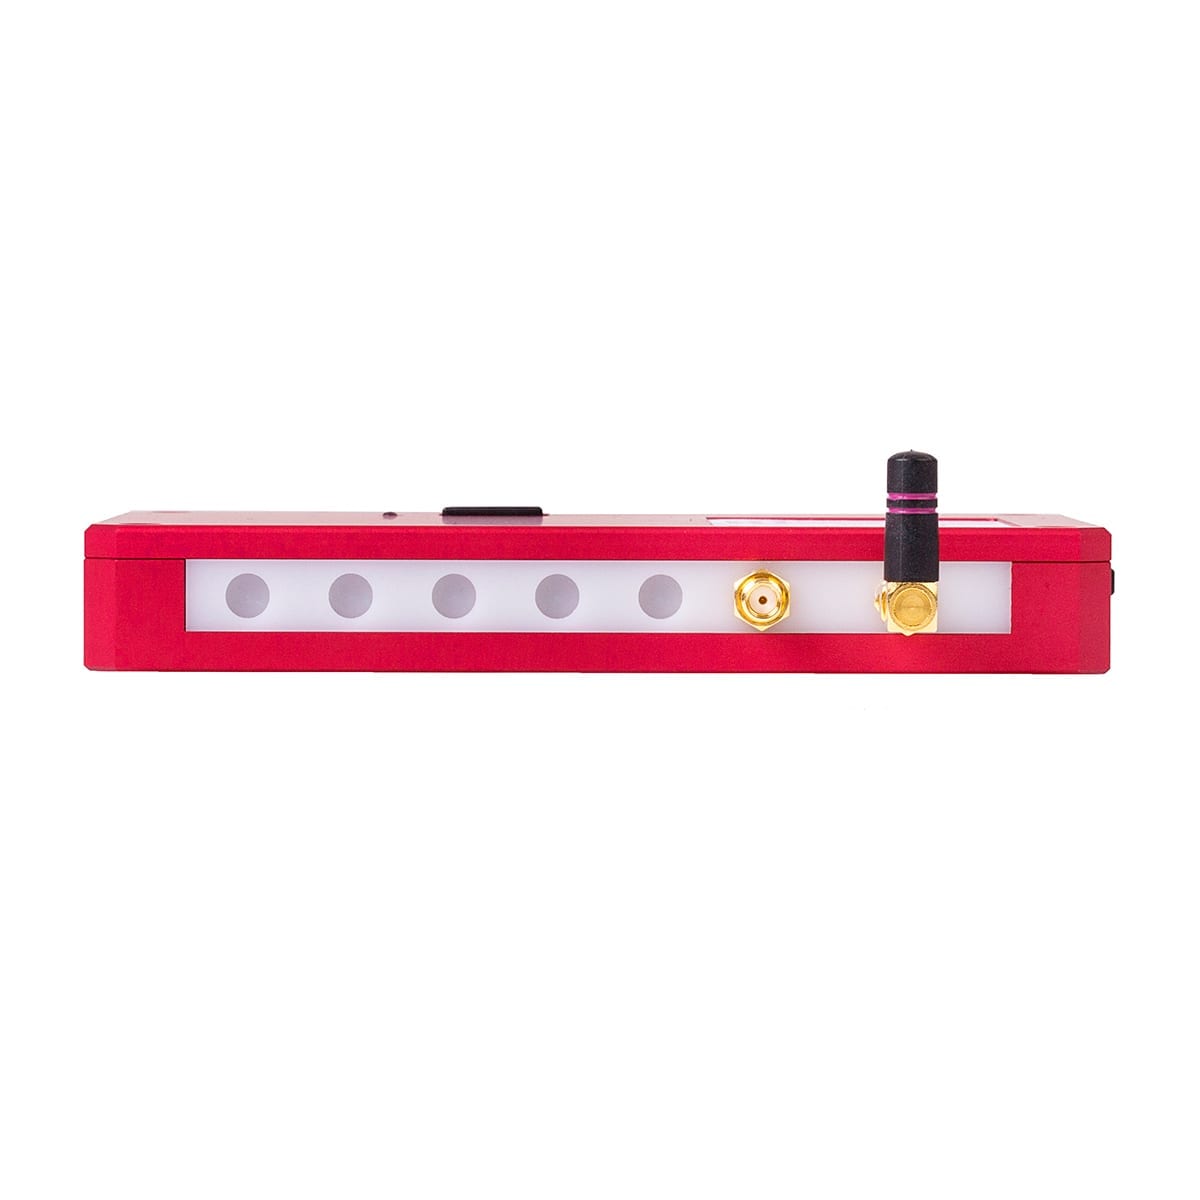 LED curing systems